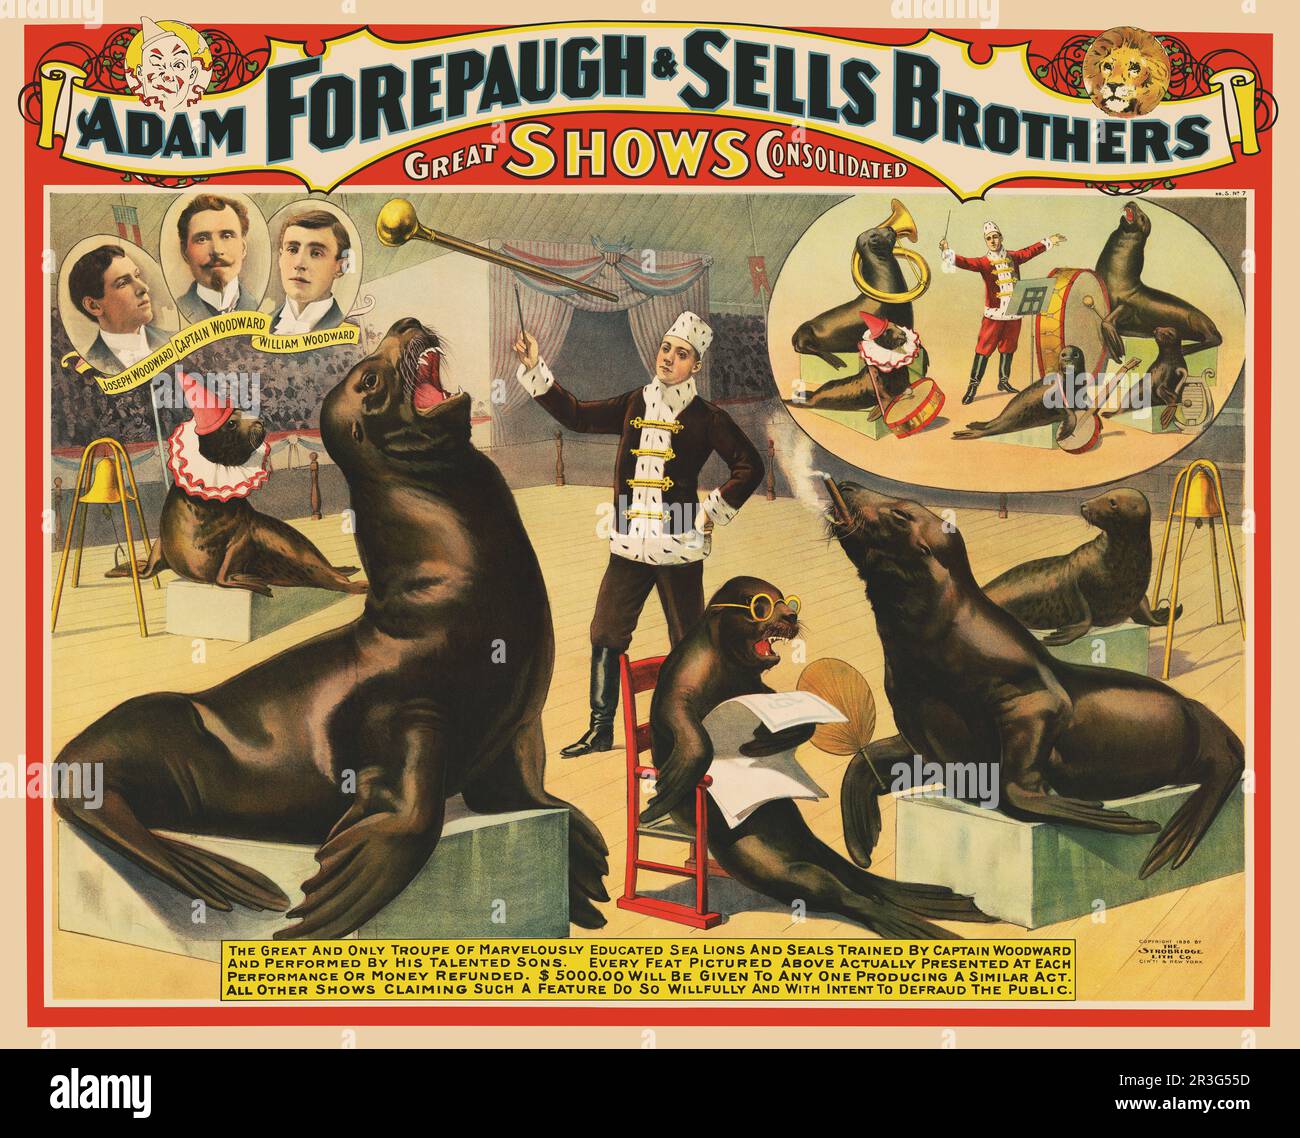 Vintage circus poster for Adam Forepaugh & Sells Brothers, showing sea lions performing in circus ring. Stock Photo